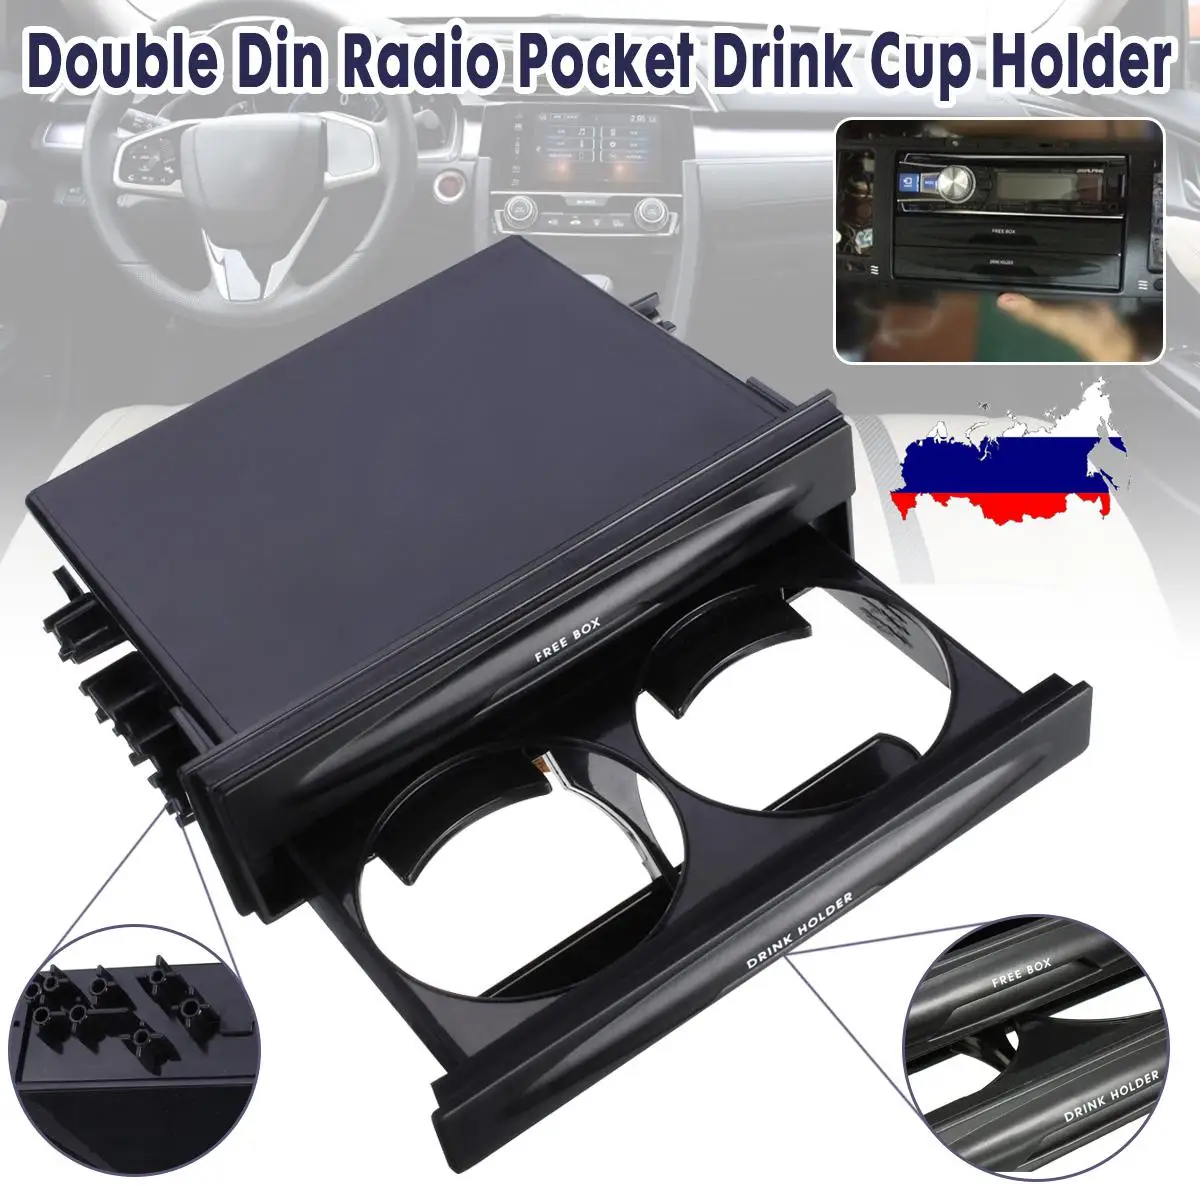 TEEKOO Double Double Din Dash Radio Installation pocket cup Holder Storage Box For Car 